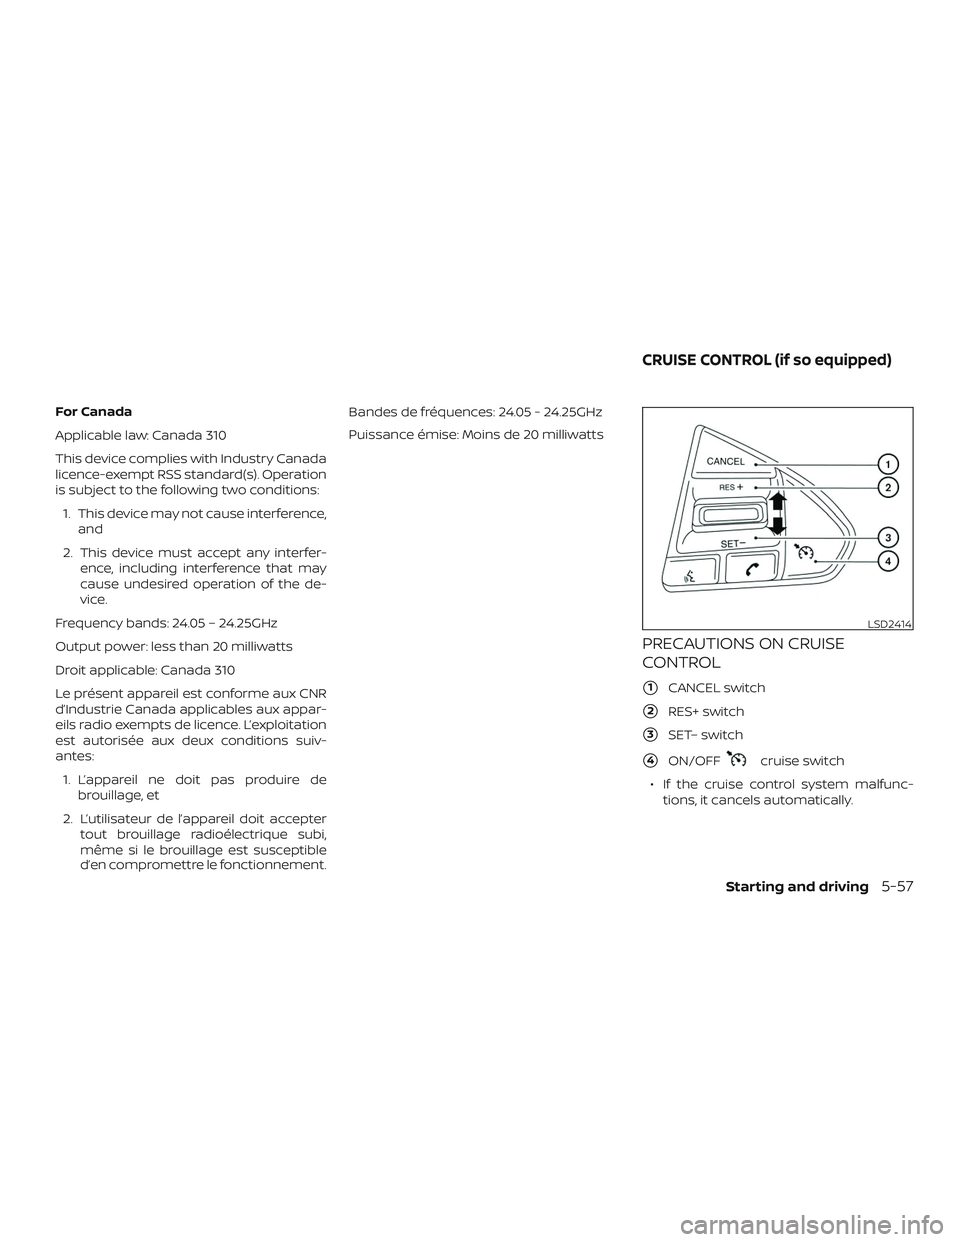 NISSAN MAXIMA 2020  Owner´s Manual For Canada
Applicable law: Canada 310
This device complies with Industry Canada
licence-exempt RSS standard(s). Operation
is subject to the following two conditions:1. This device may not cause interf